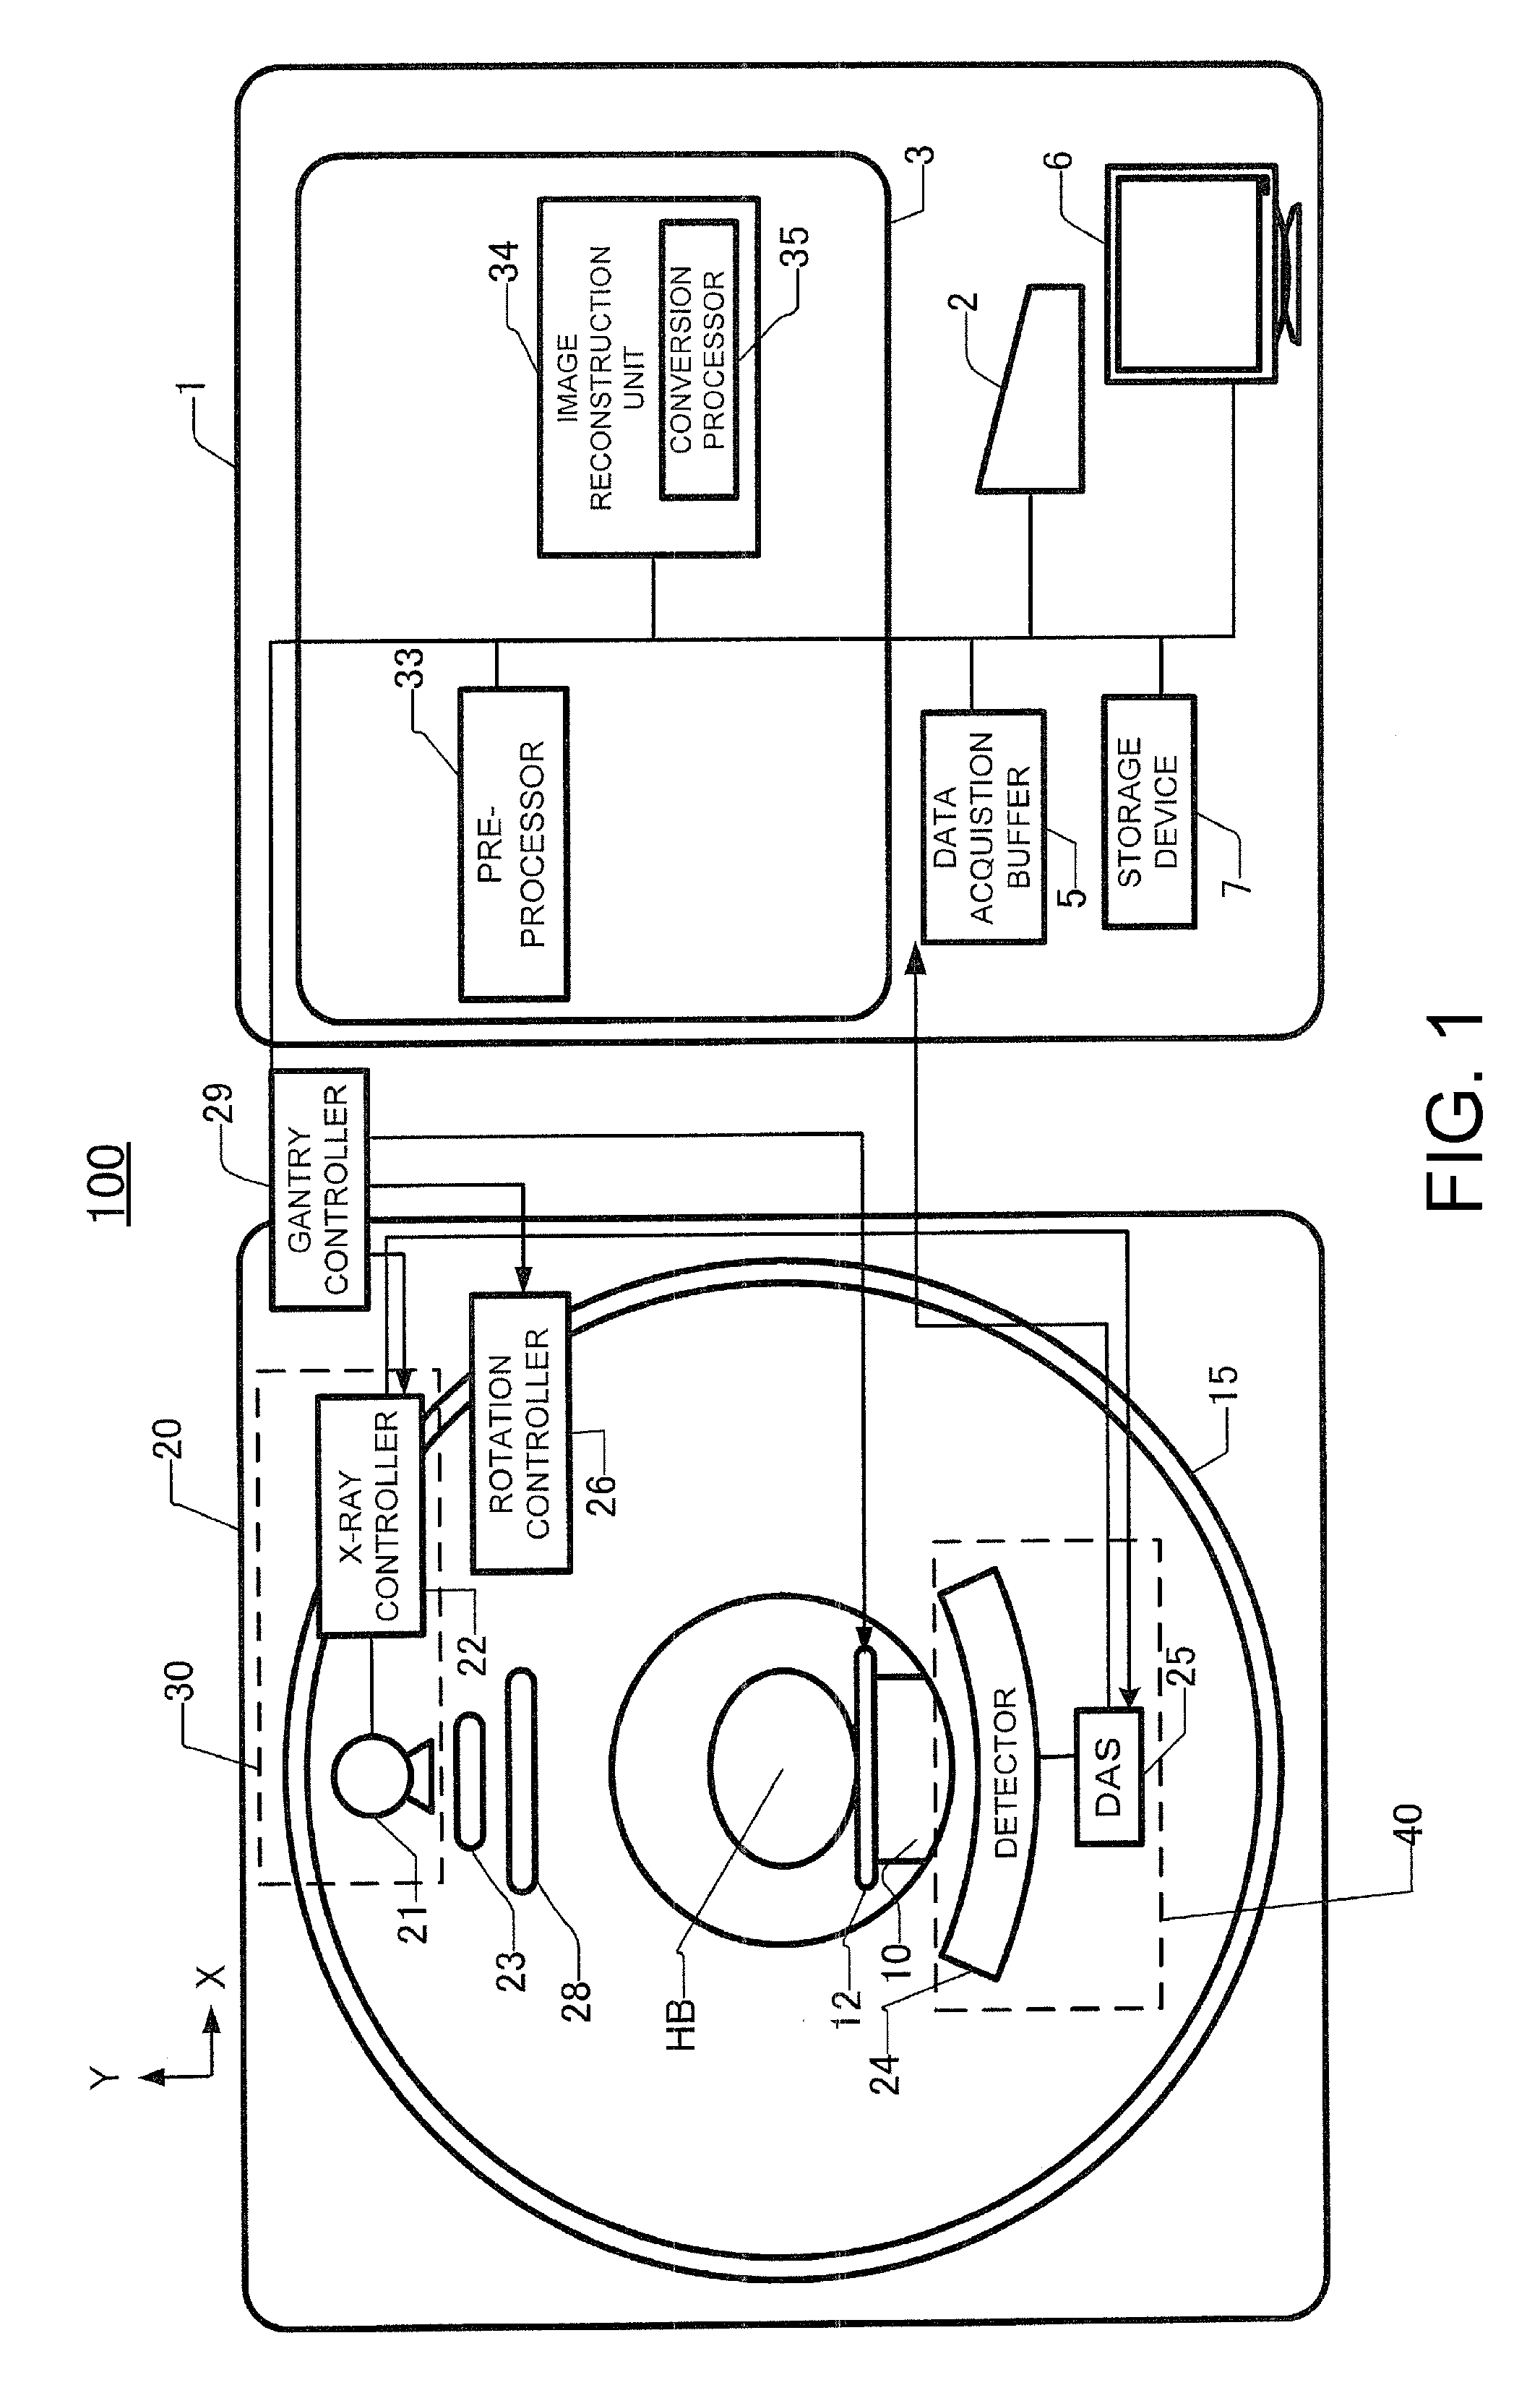 X-ray CT apparatus and method for processing X-ray projection data